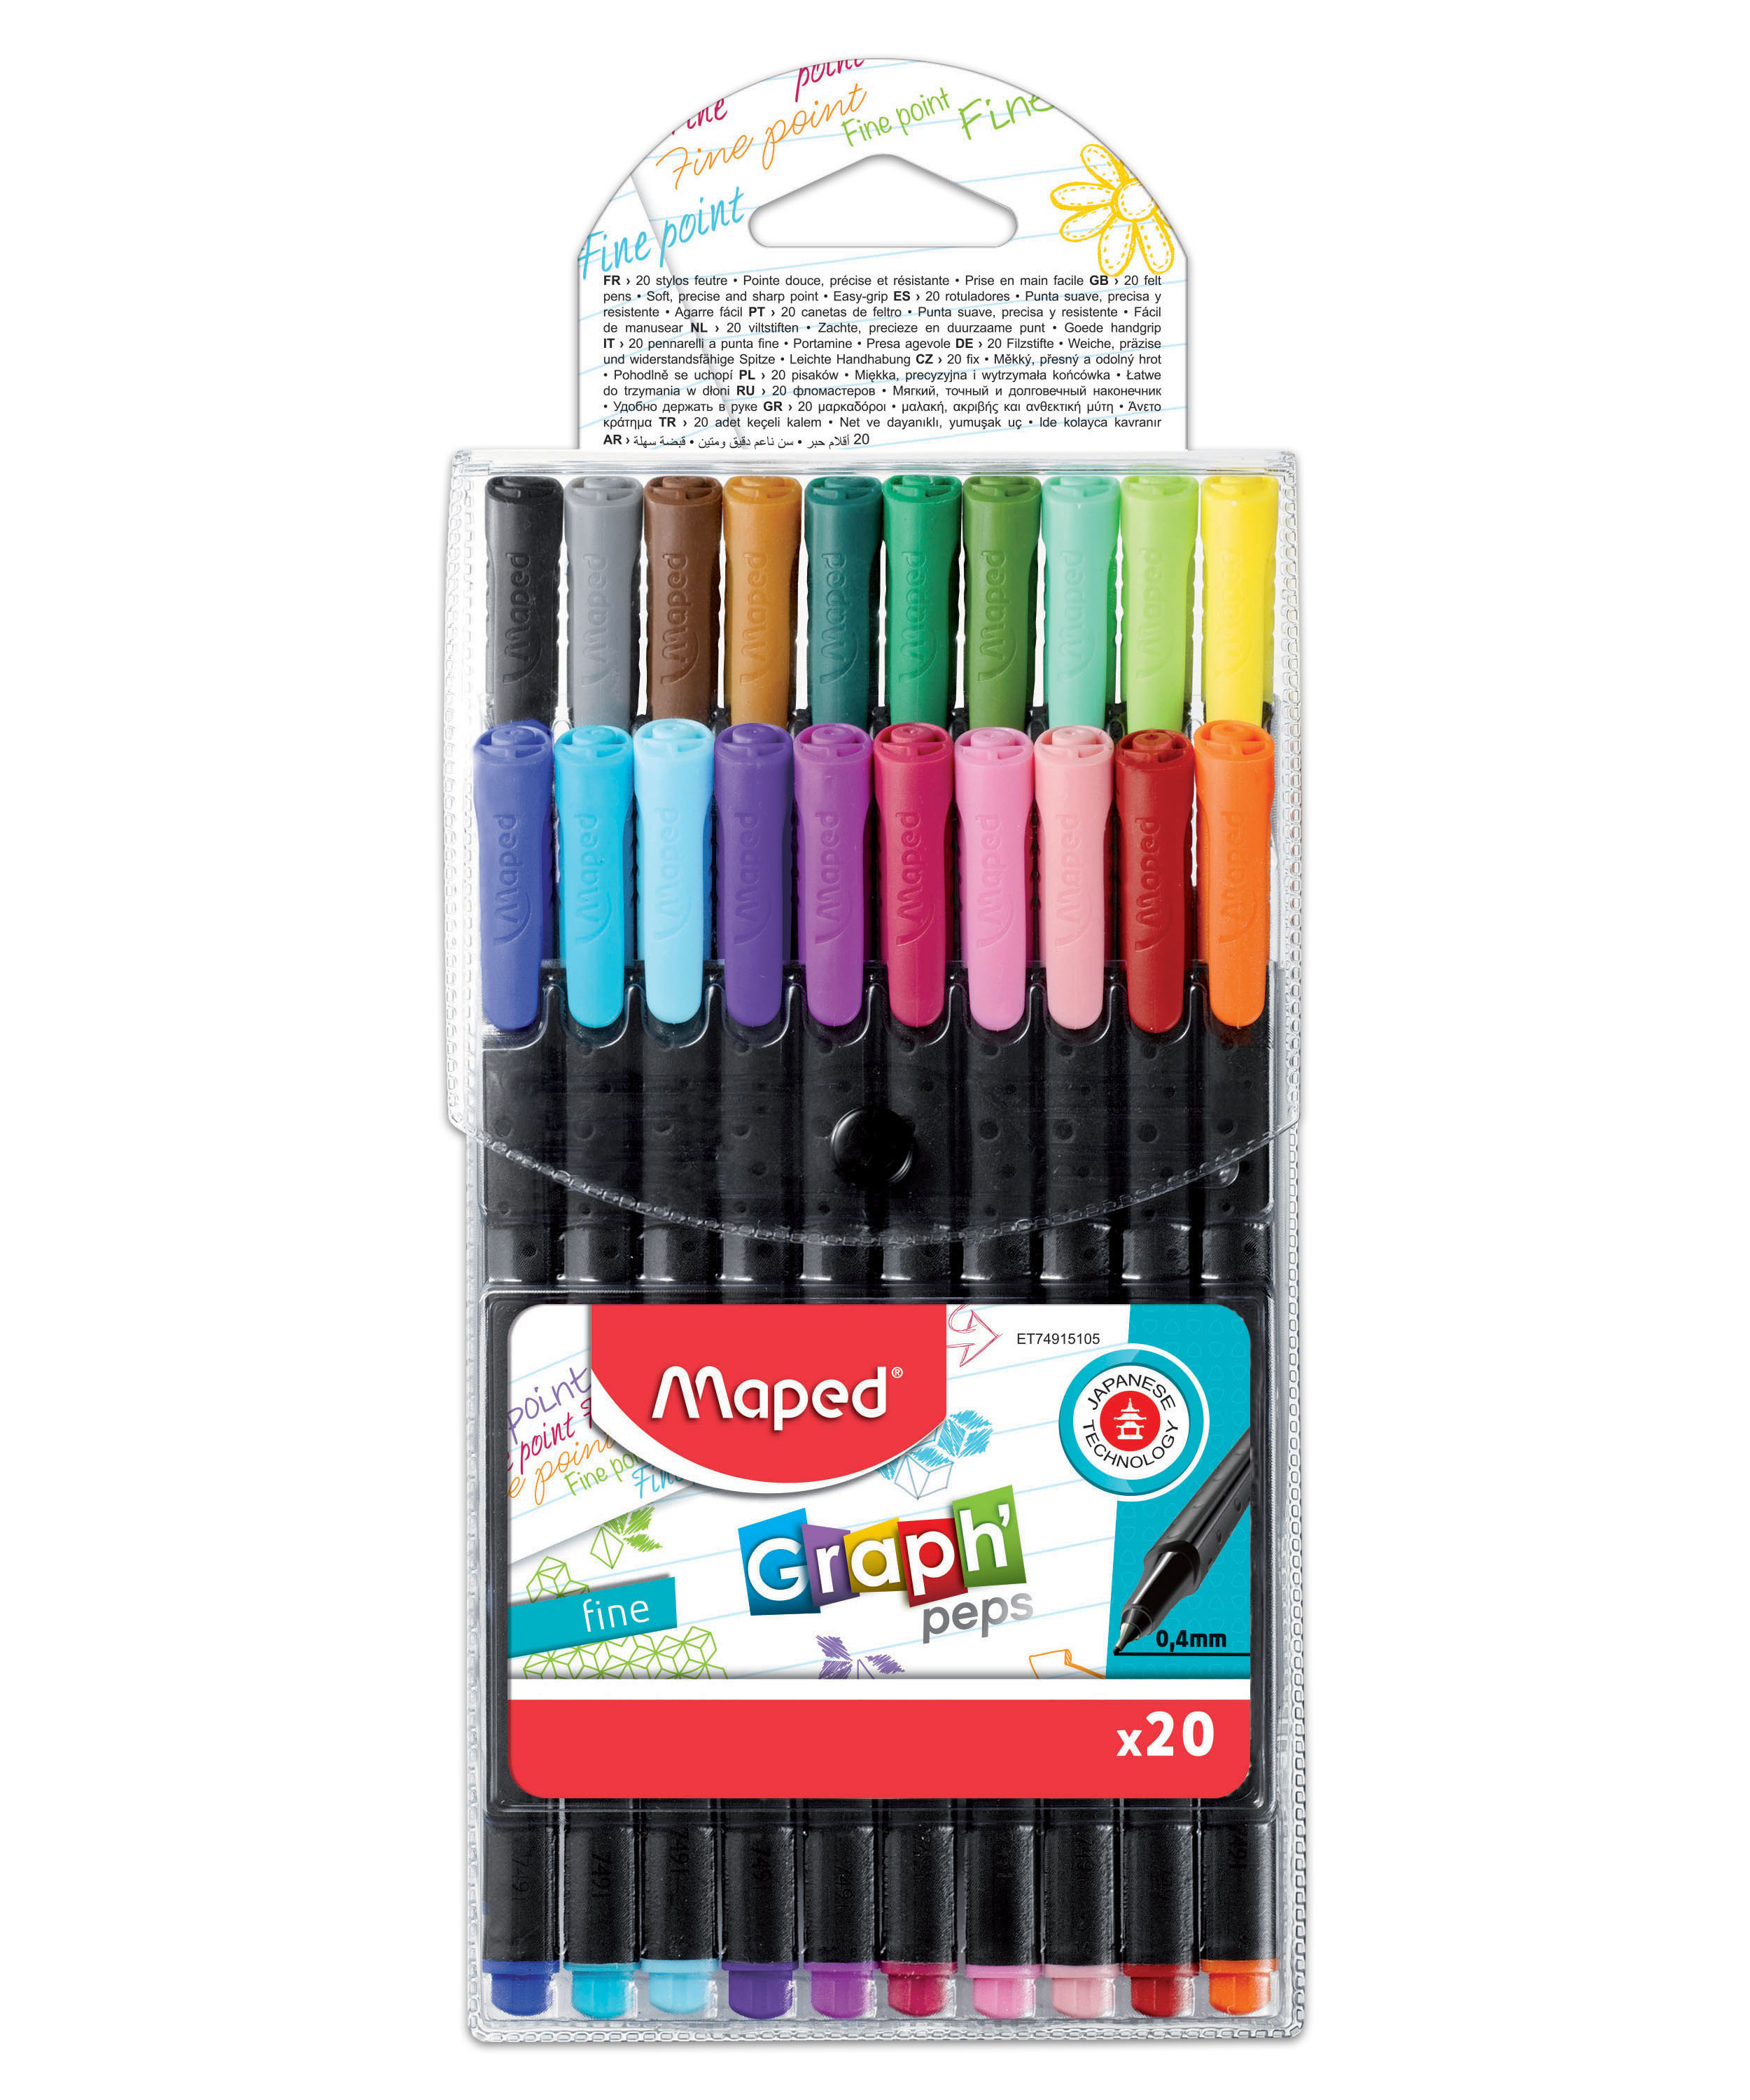 Maped Graph'Peps Fine Tip Triangular Felt Pens in Reusable Case - 20 Assorted Colors - image 1 of 7